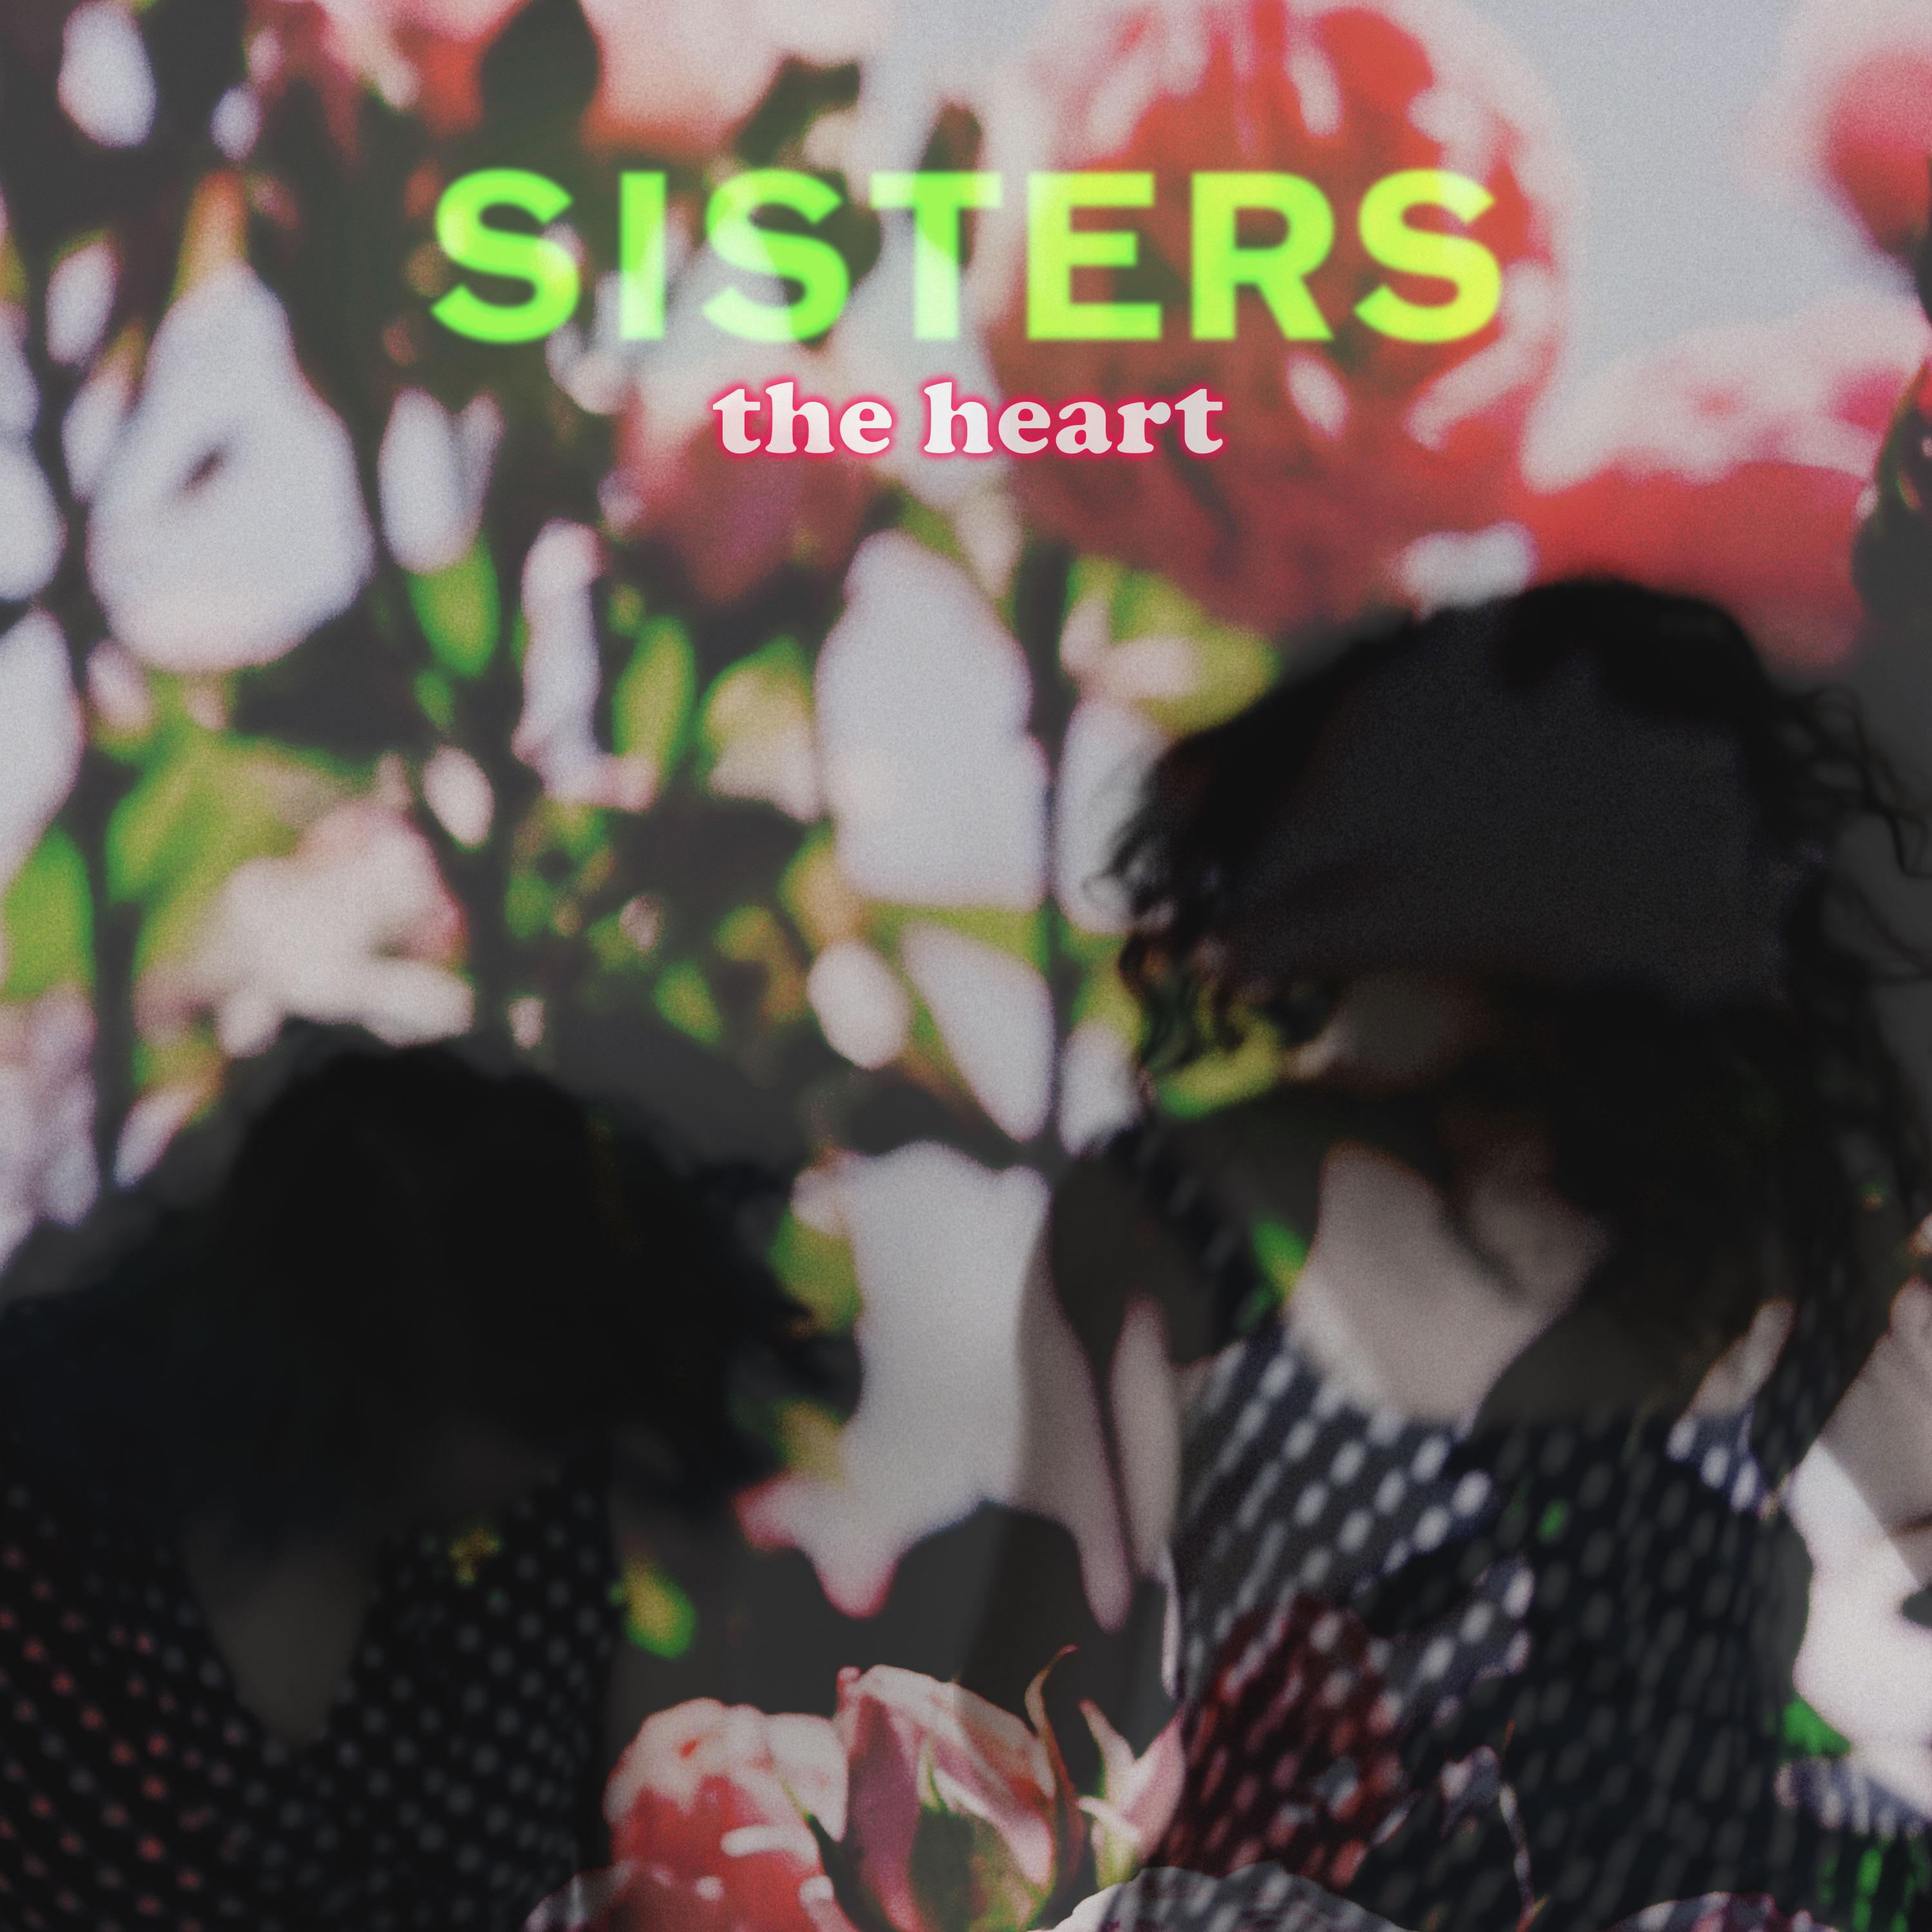 Thumbnail for "SISTERS: But Beautiful".